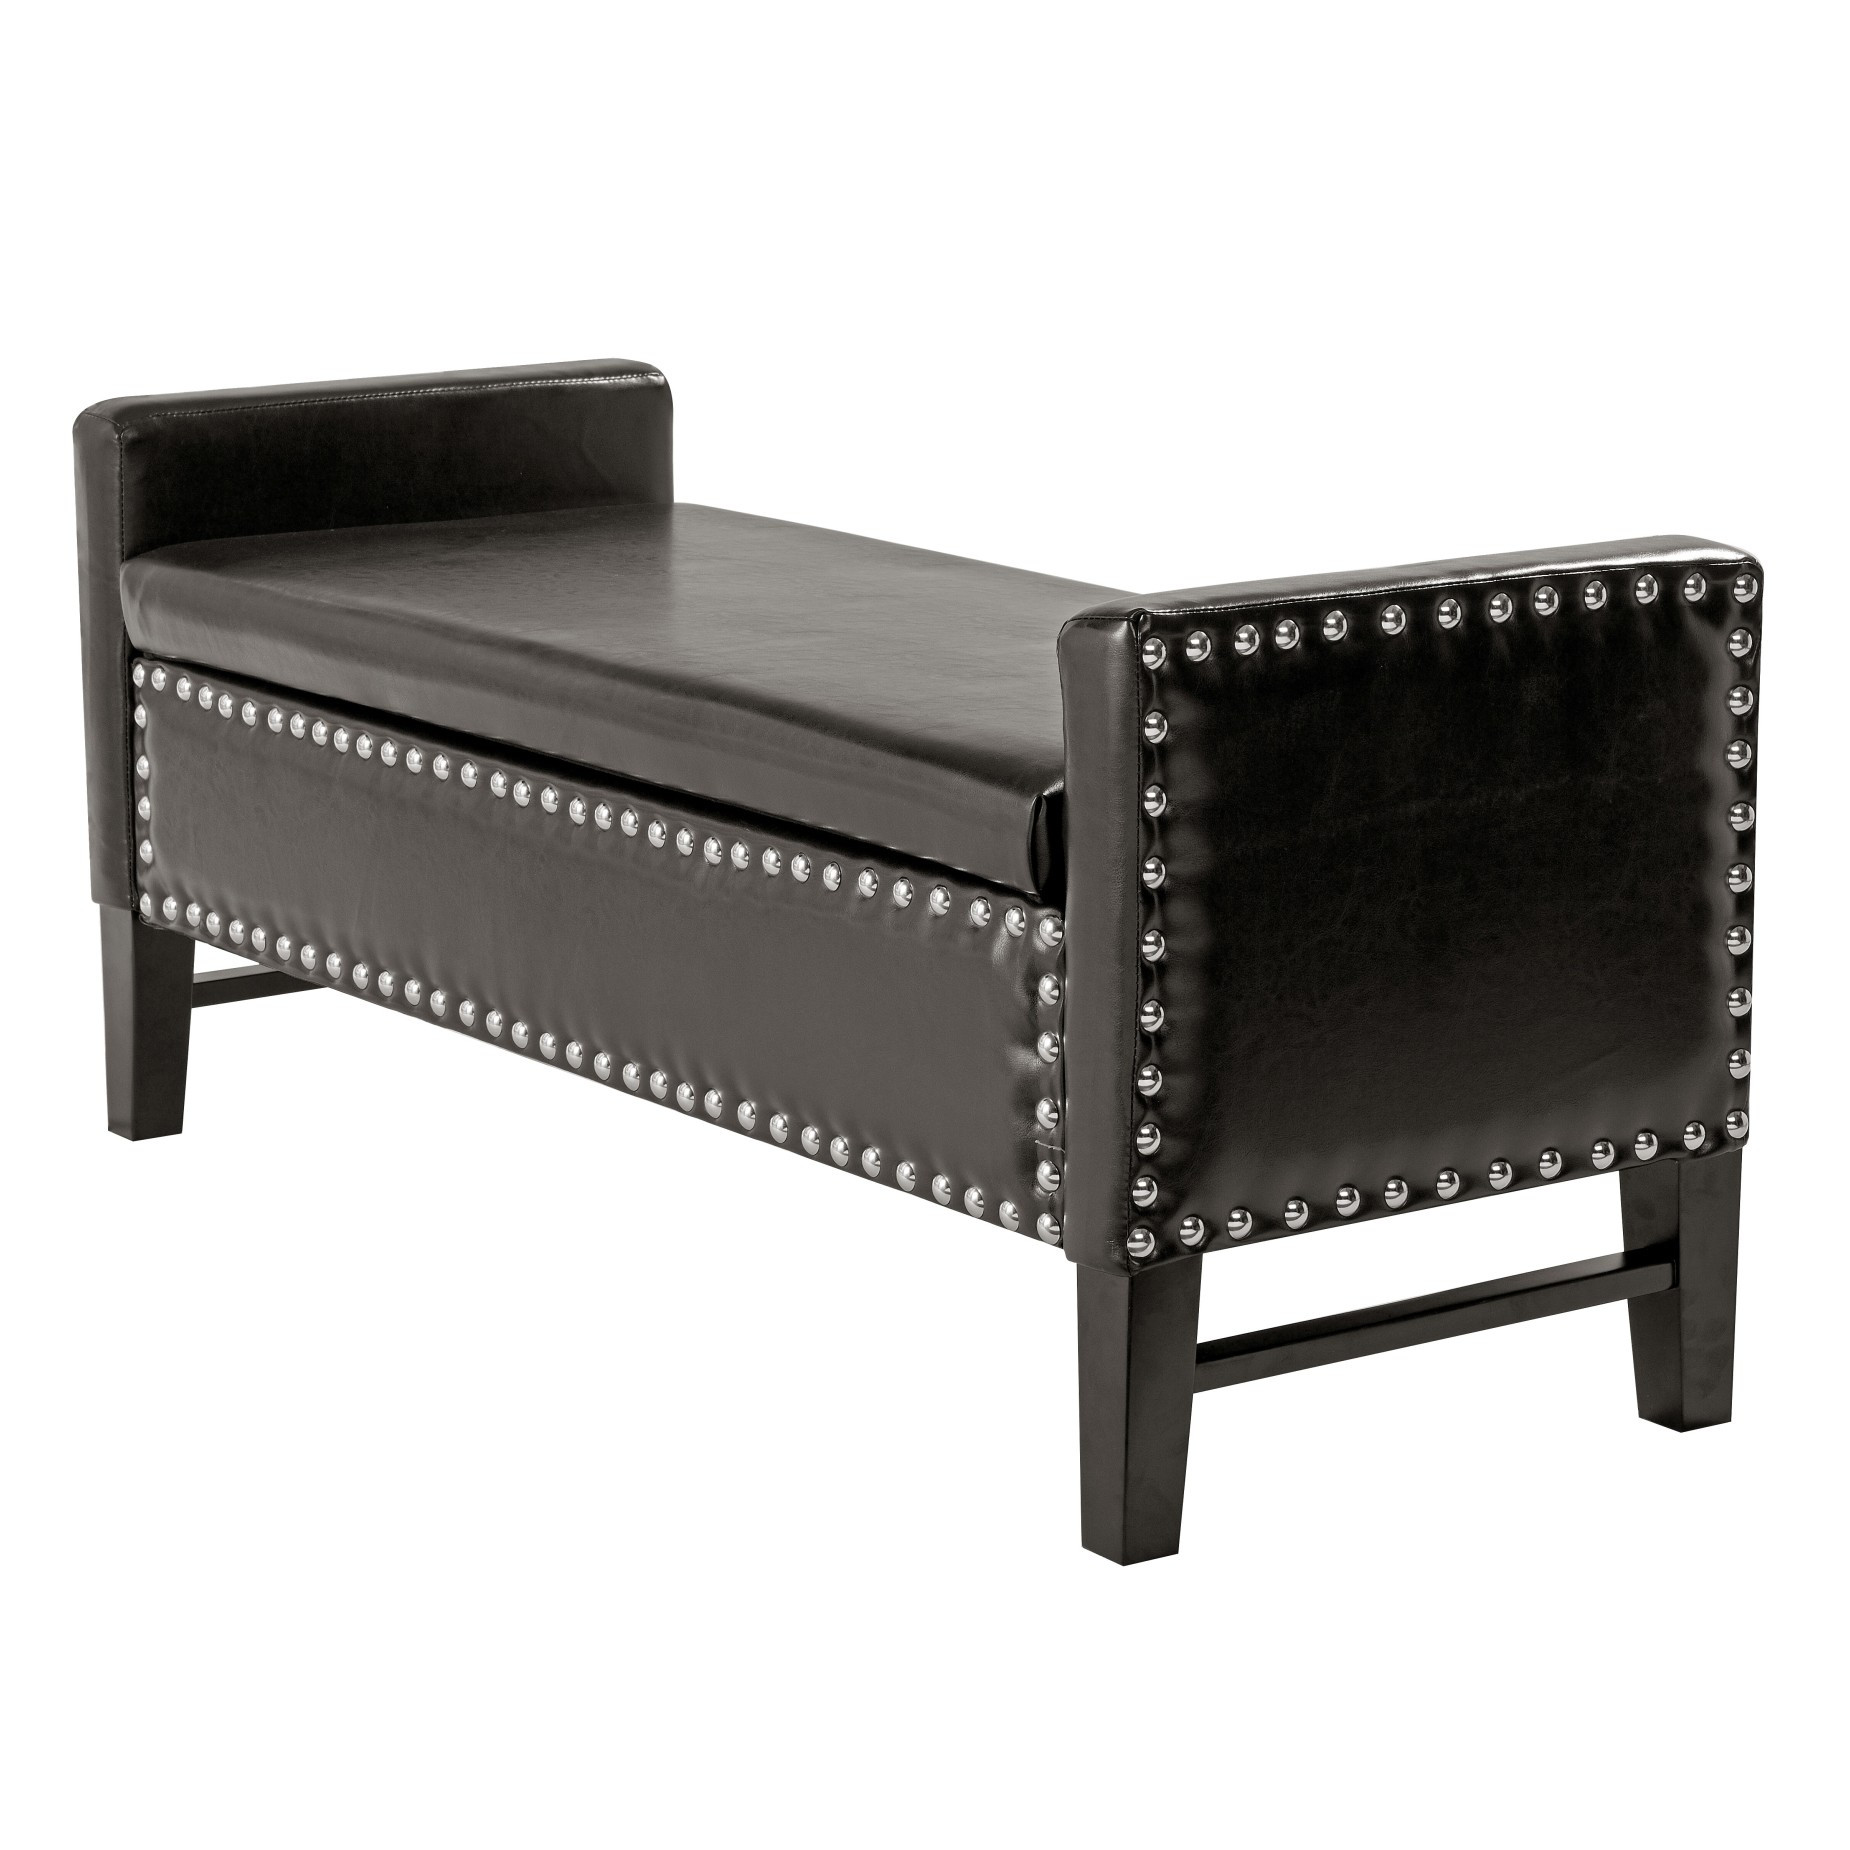 50" Espresso Upholstered PU Leather Bench with Flip top, Shoe Storage-530654-1